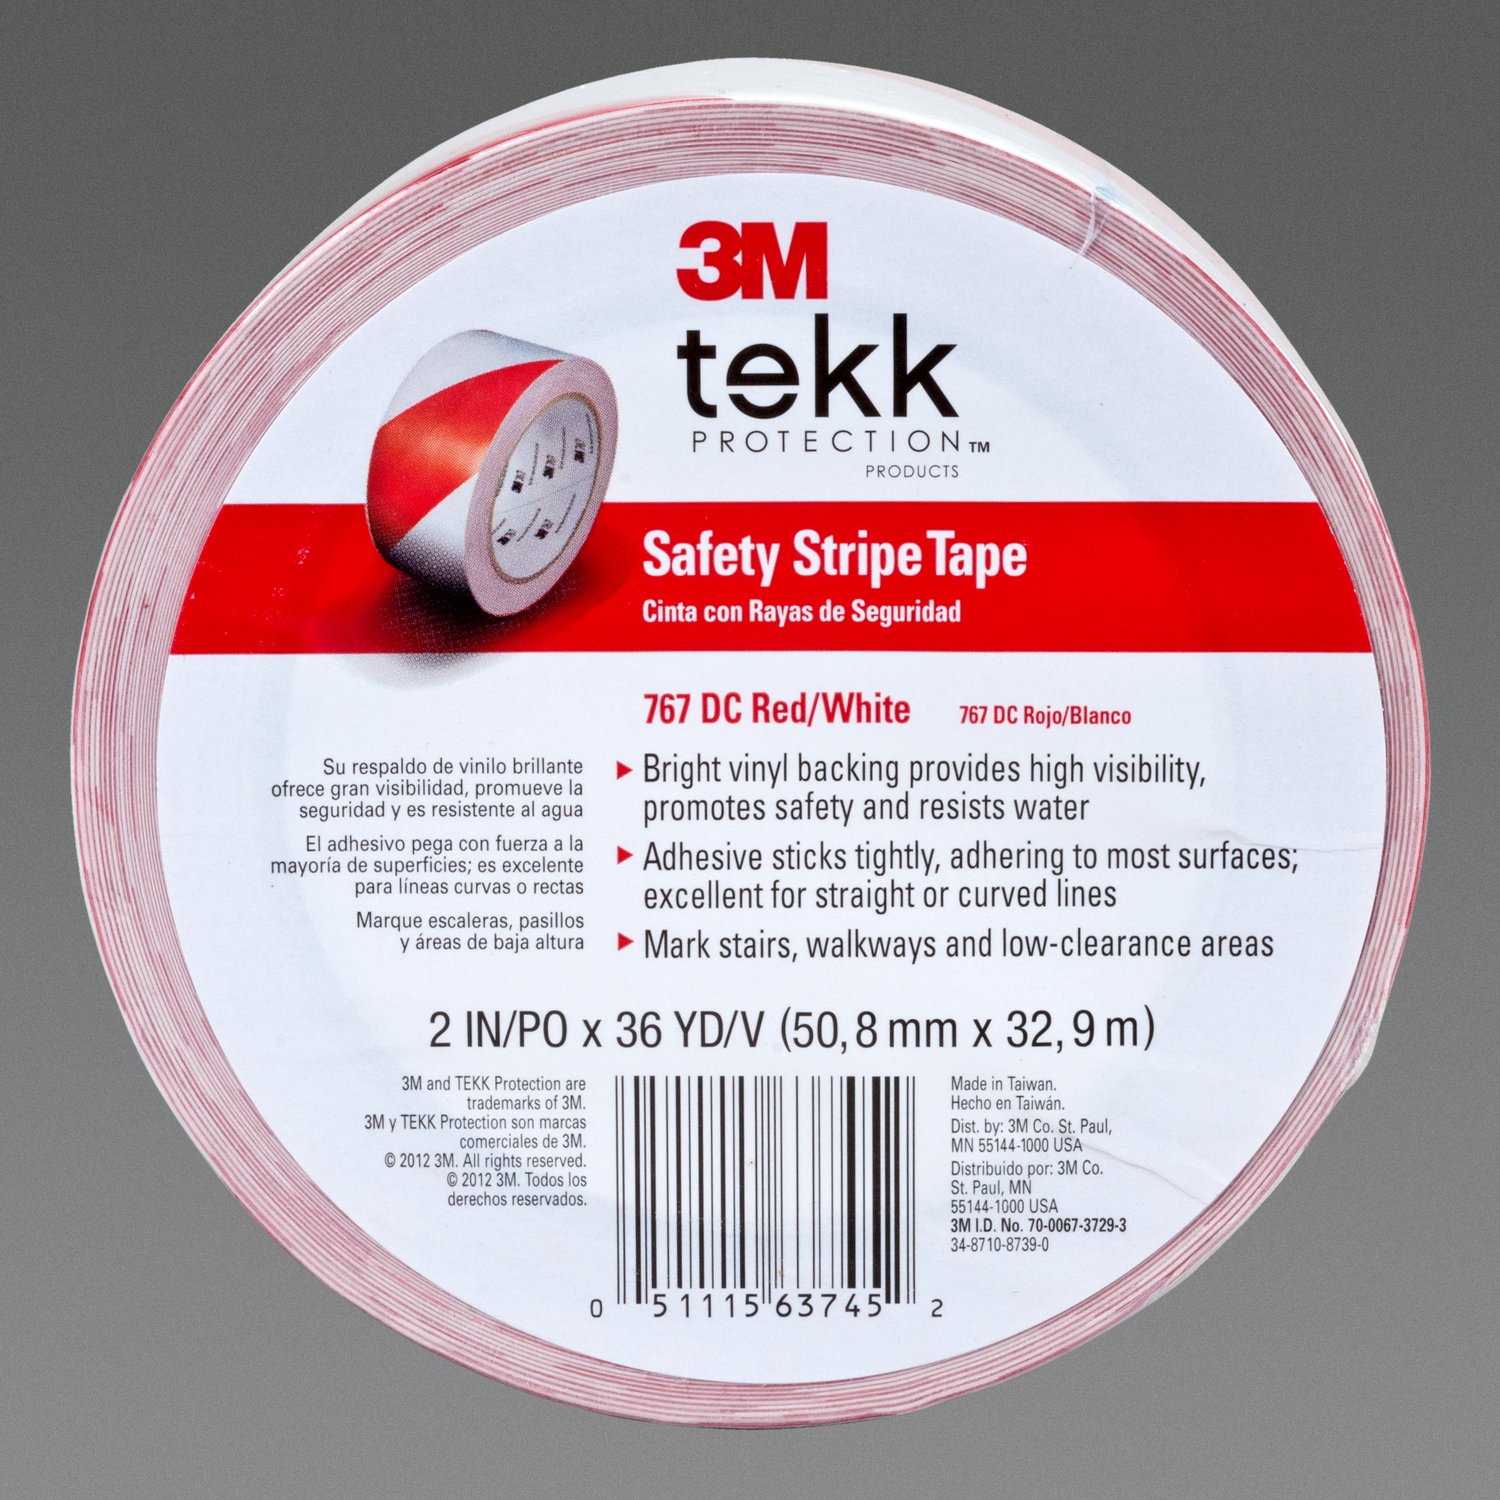 7010375766 - 3M Safety Stripe Vinyl Tape 767, Red/White, 2 in x 36 yd, 5 mil, 12 Roll/Case, Individually Wrapped Conveniently Packaged